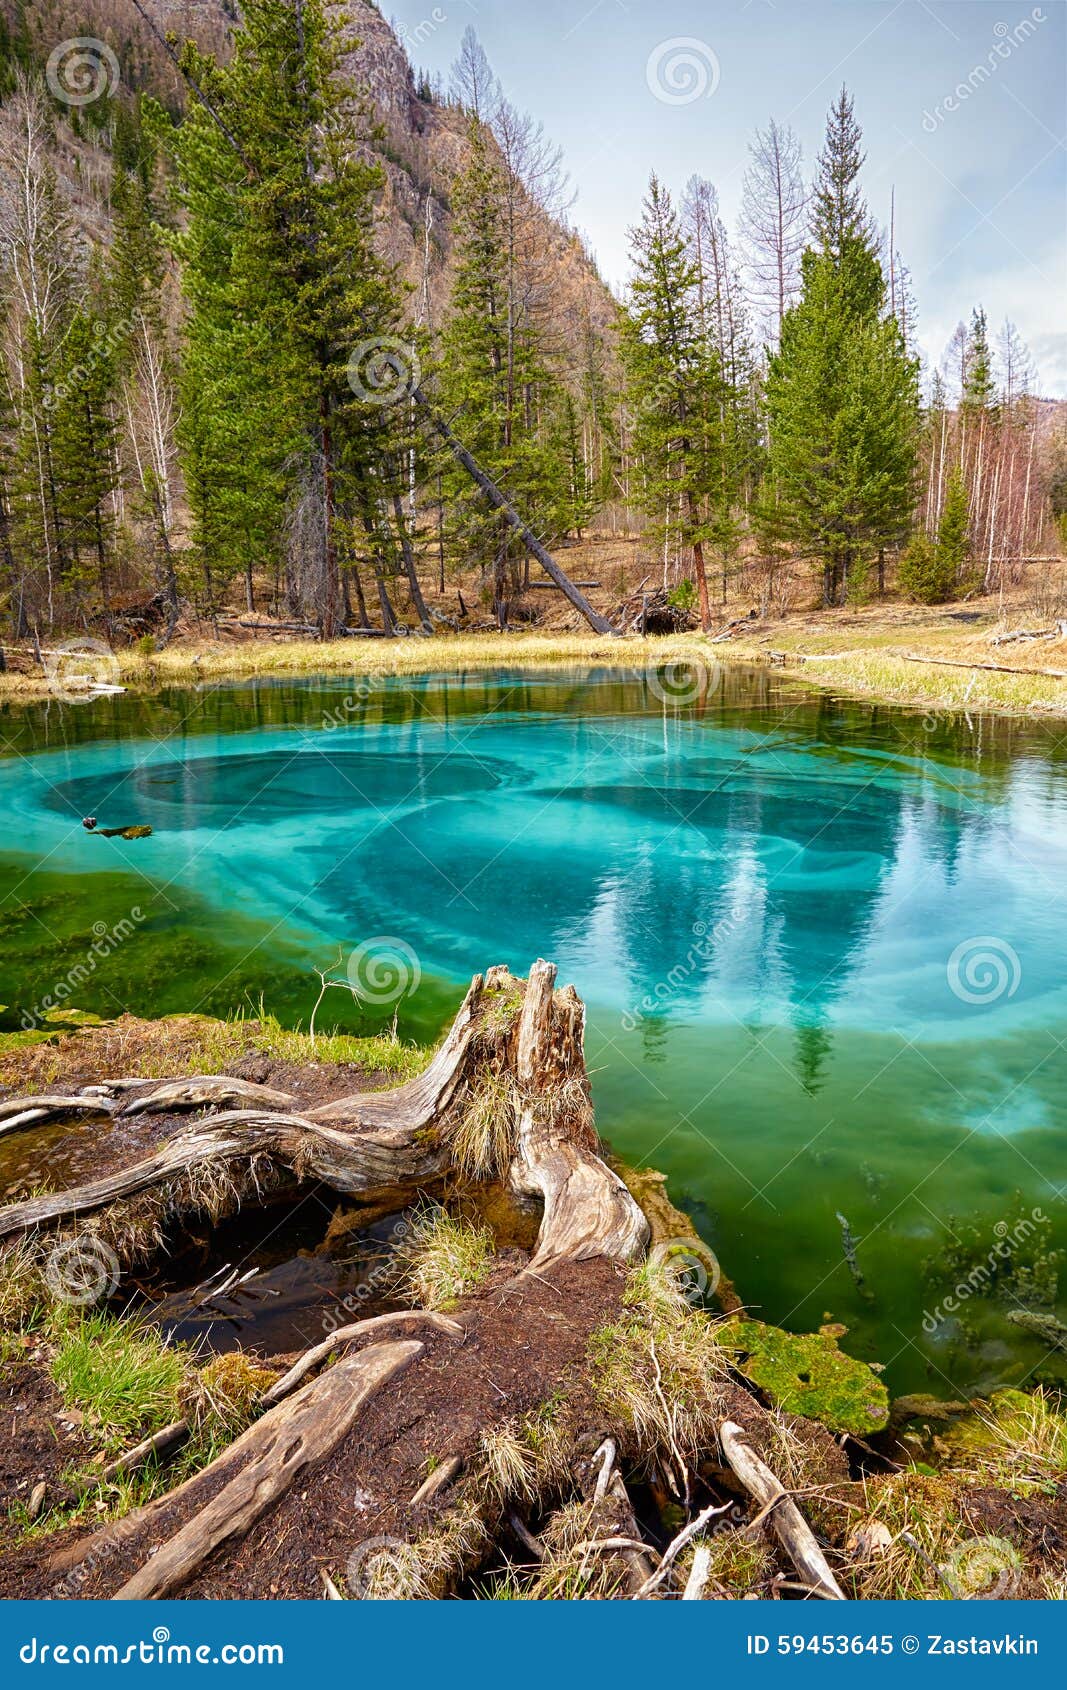 so-called blue geyser lake in altay mountains